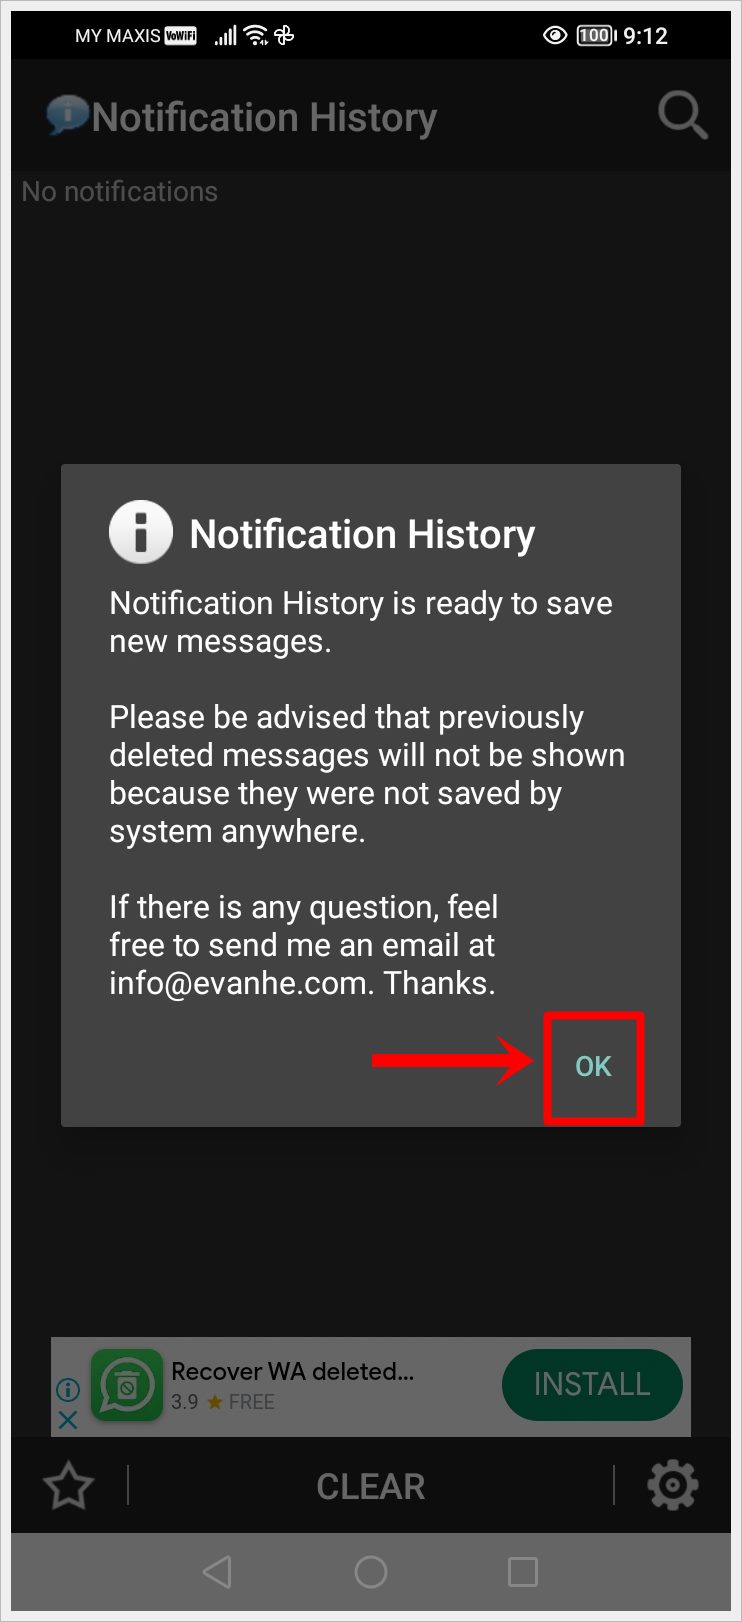 This image shows an alert pop-up to inform that the Notification History App setup has been completed on an Android phone. The 'OK' button is highlighted.